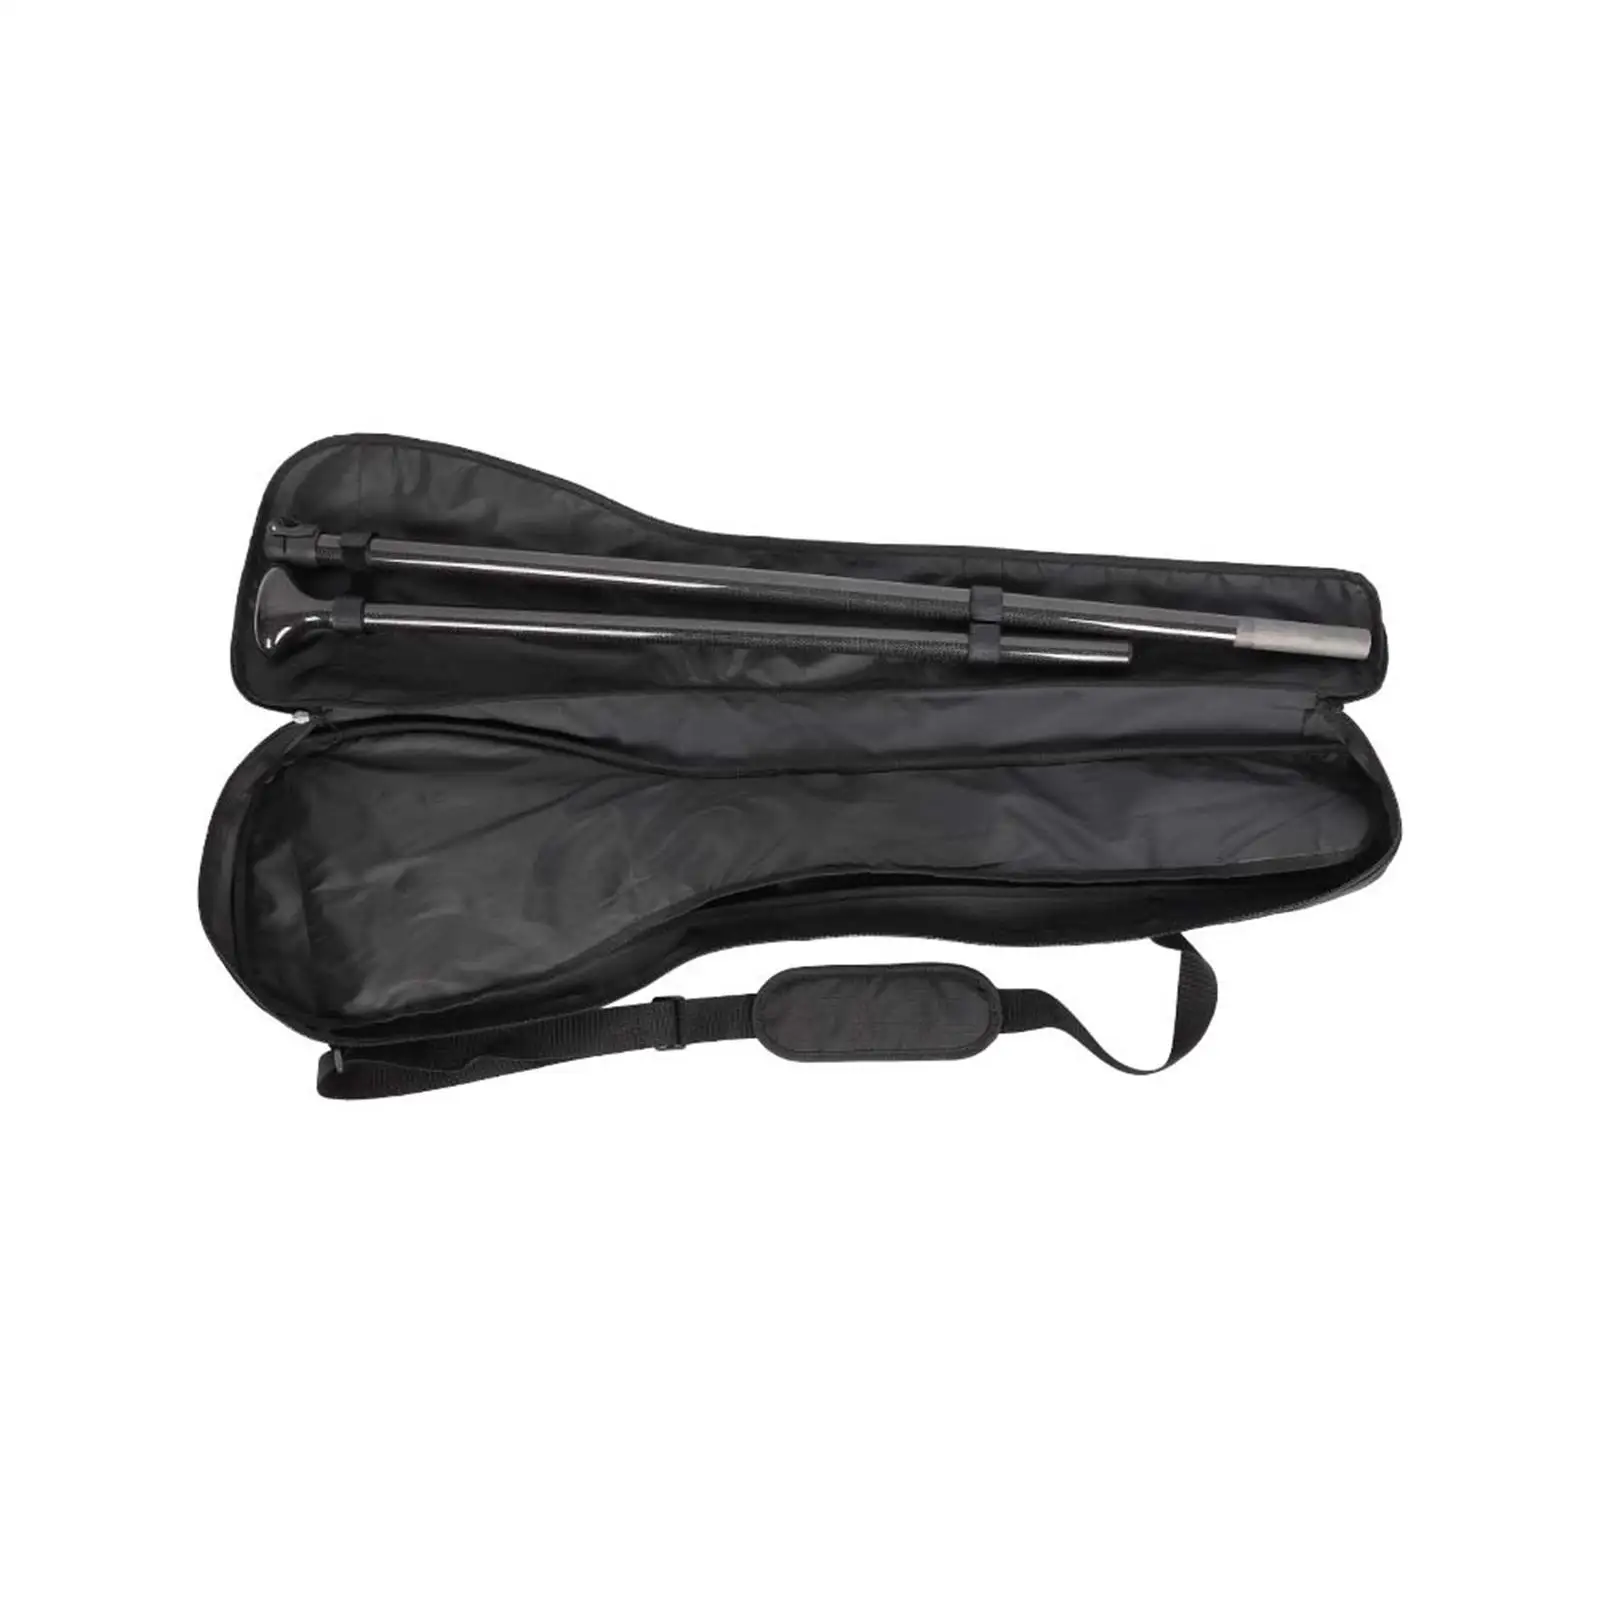 Canoe Kayak Paddle Bag for 3 Piece Split Paddle Functional Thick Durable Lightweight